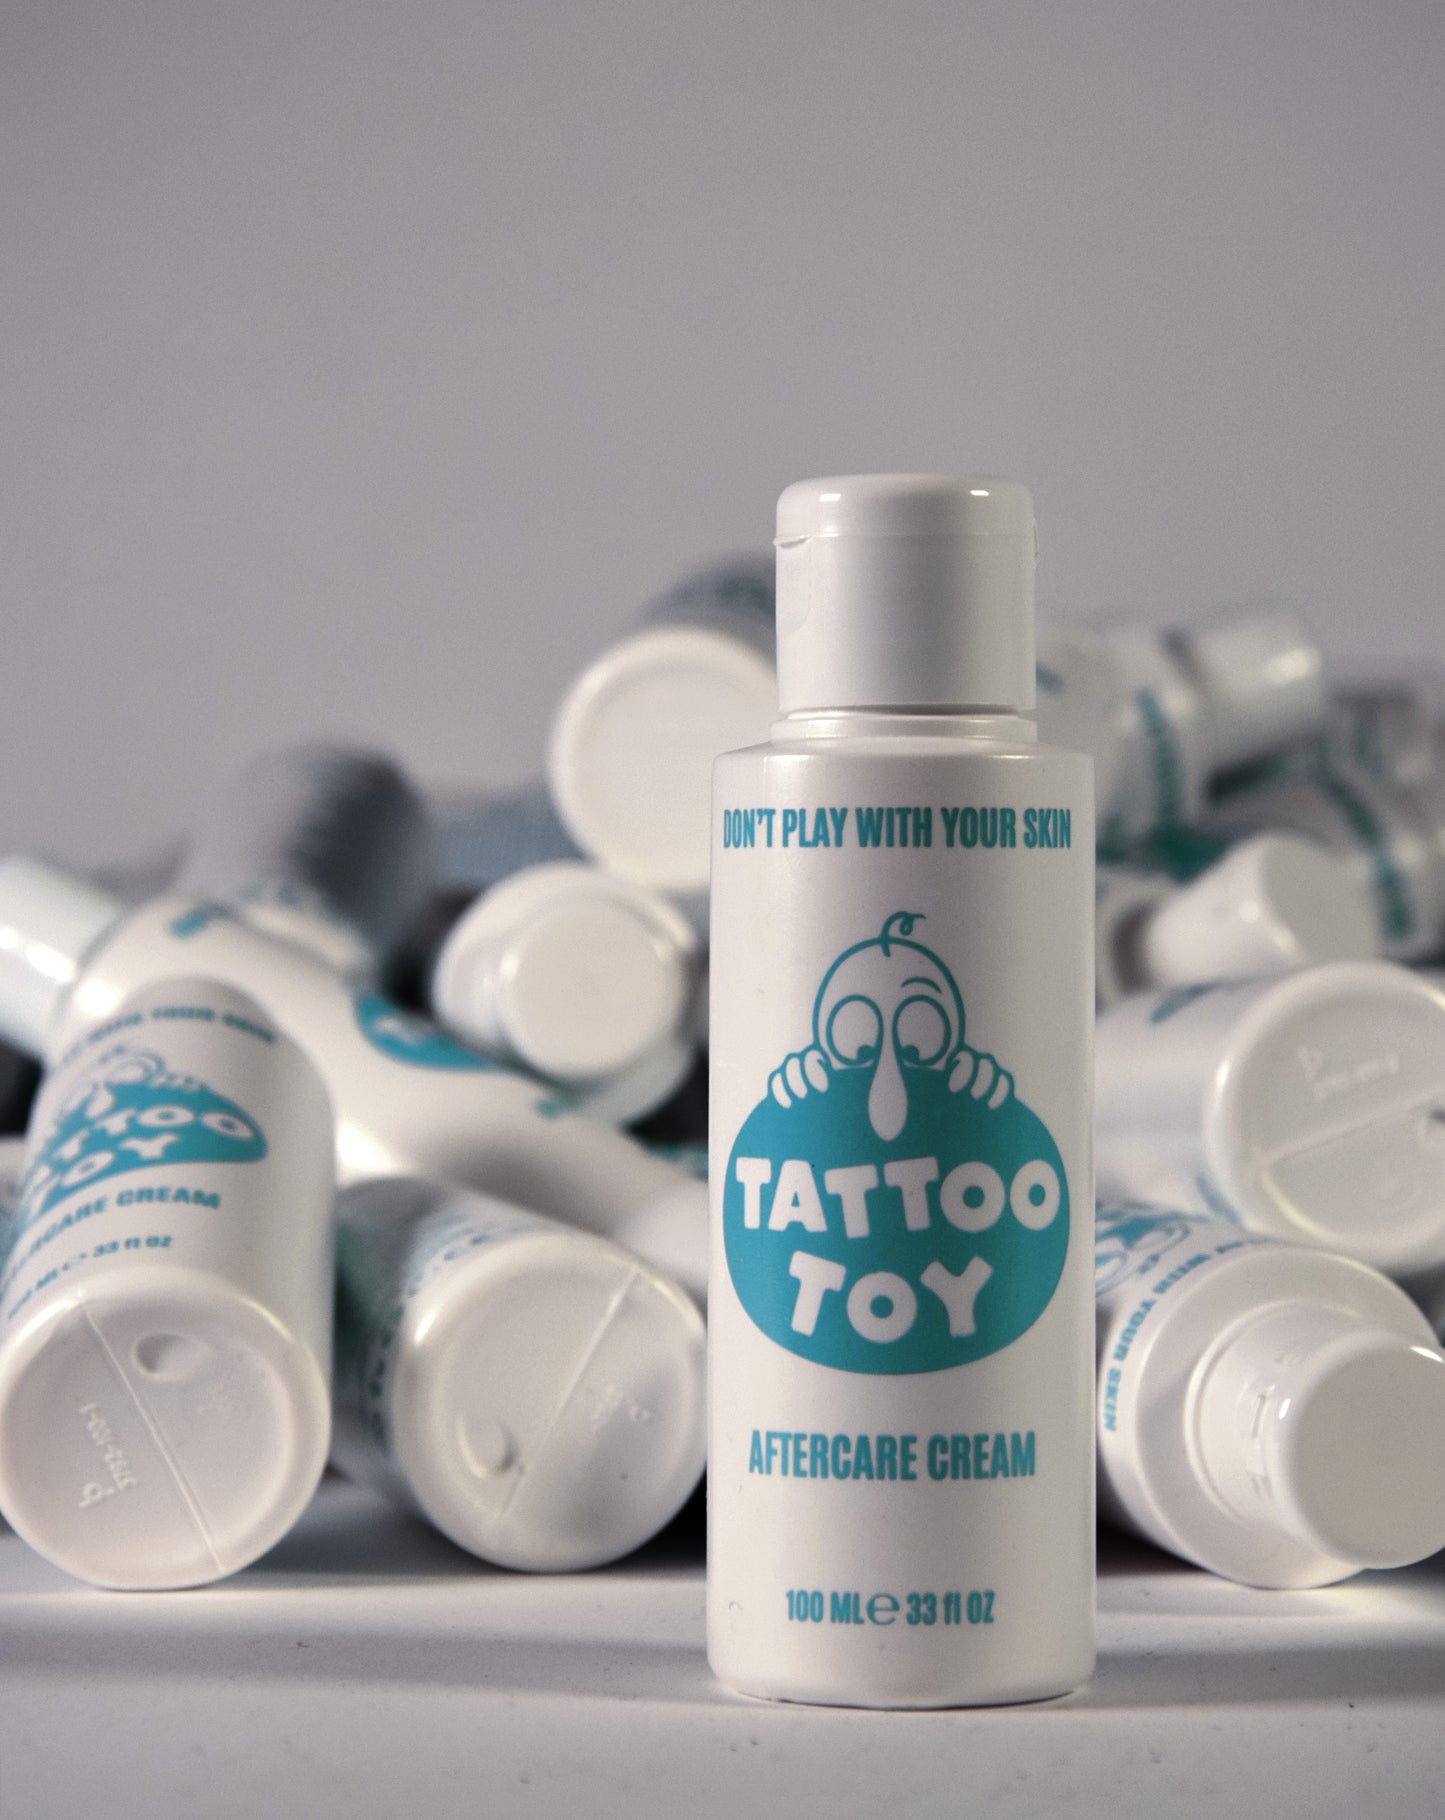 TATTOO TOY AFTERCARE CREAM